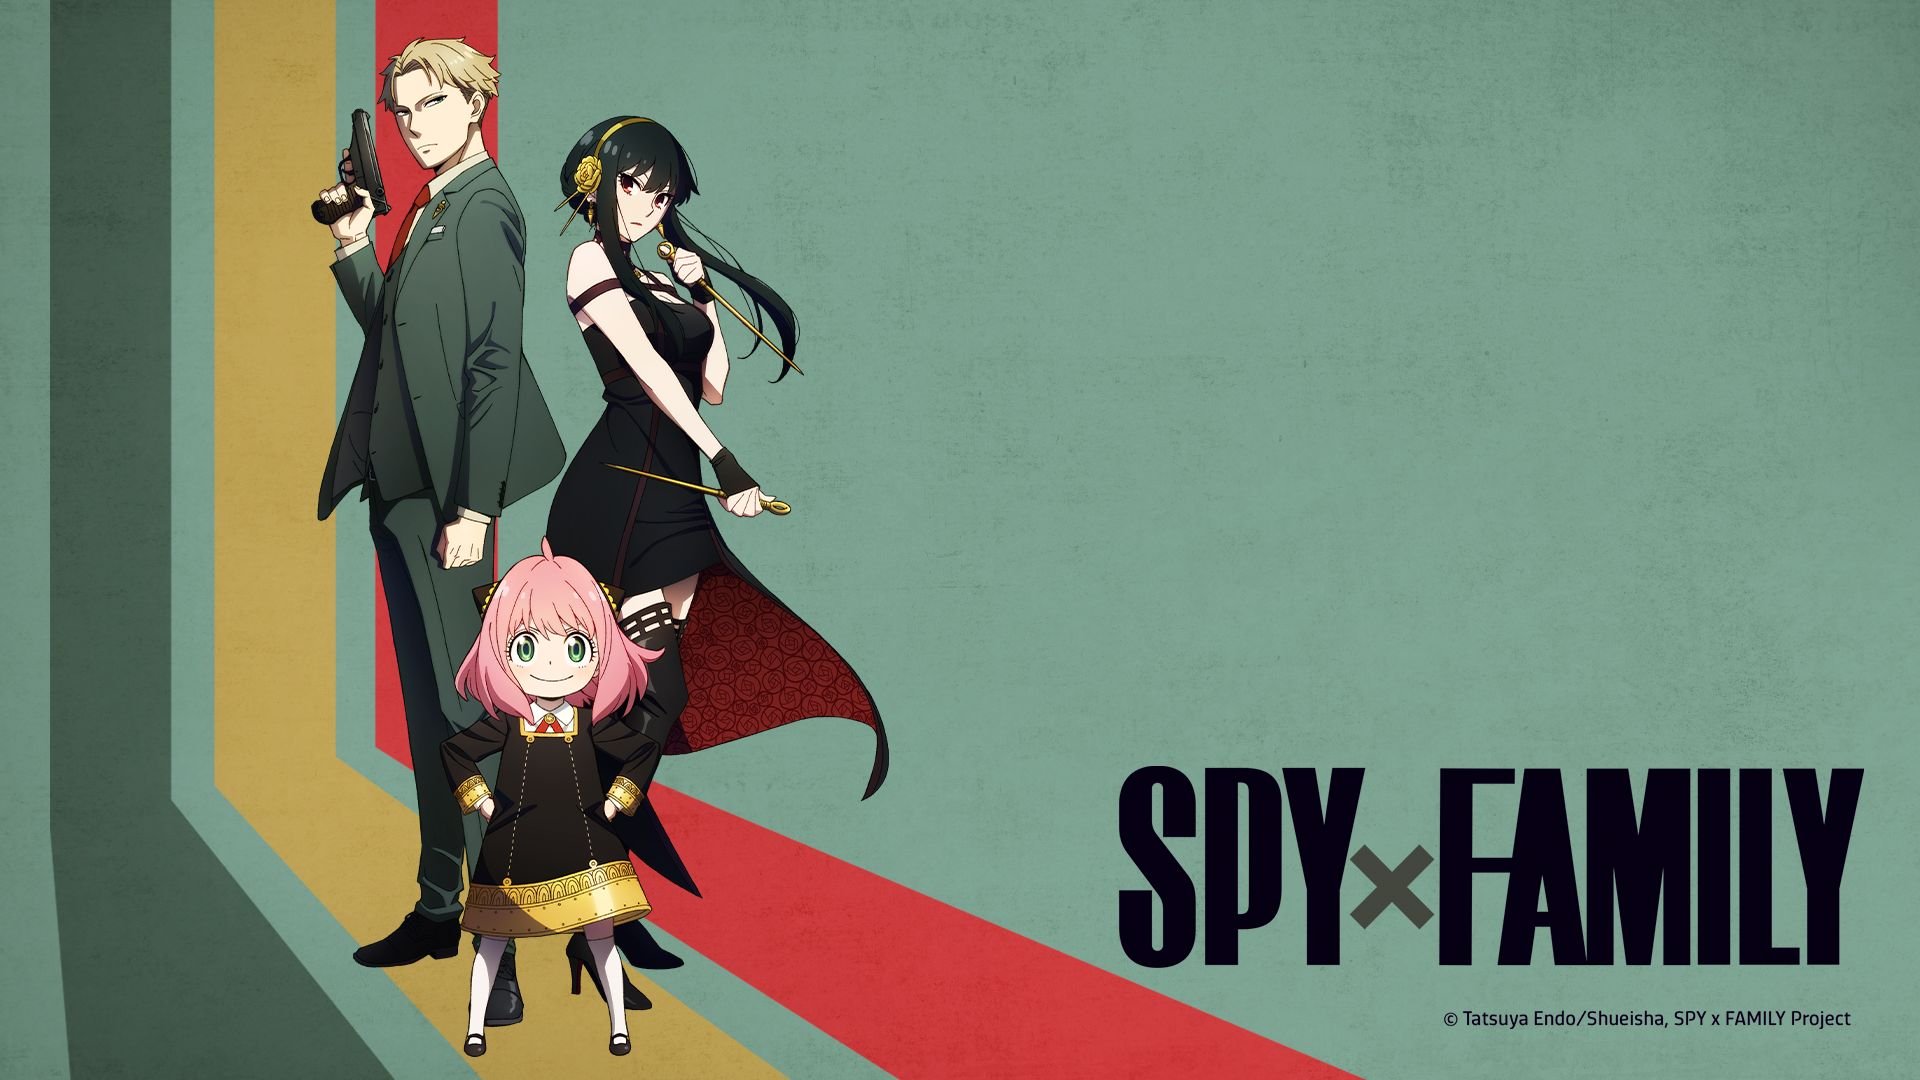 Spy x Family Shares First Full Trailer and New Cast Additions